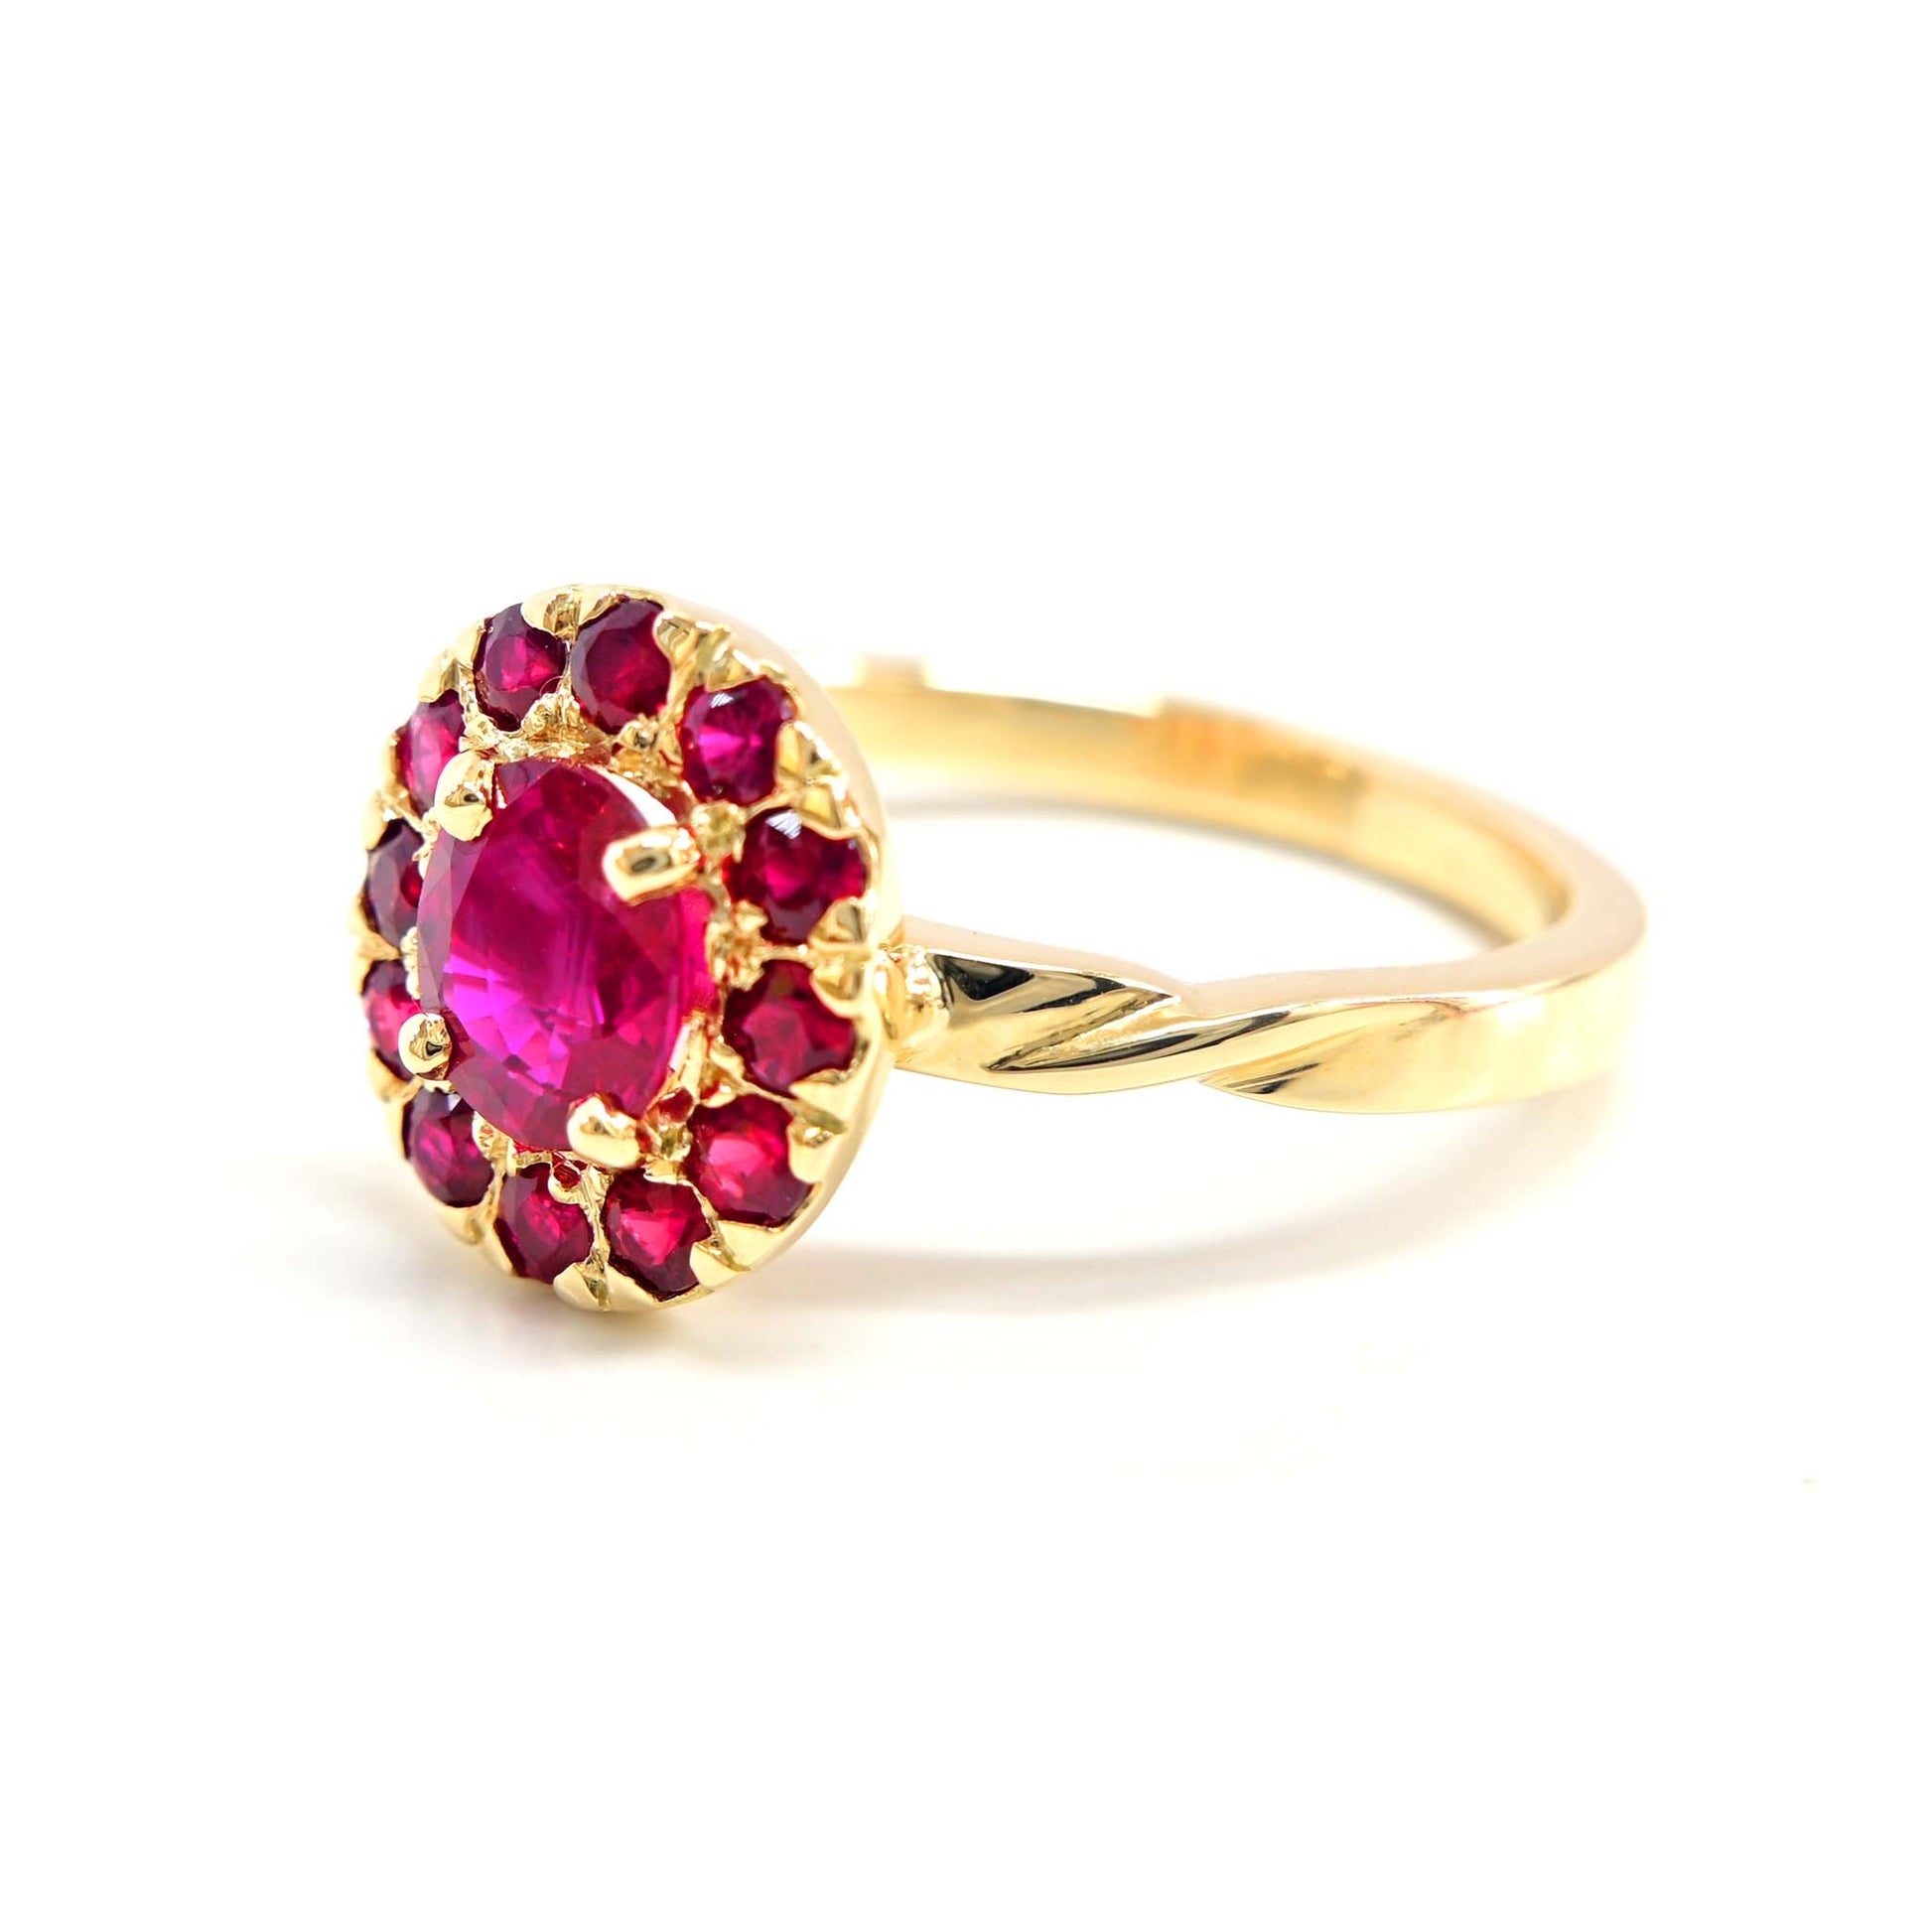 Vibrant ruby gemstone framed by a delicate halo of small rubies, exuding timeless beauty.